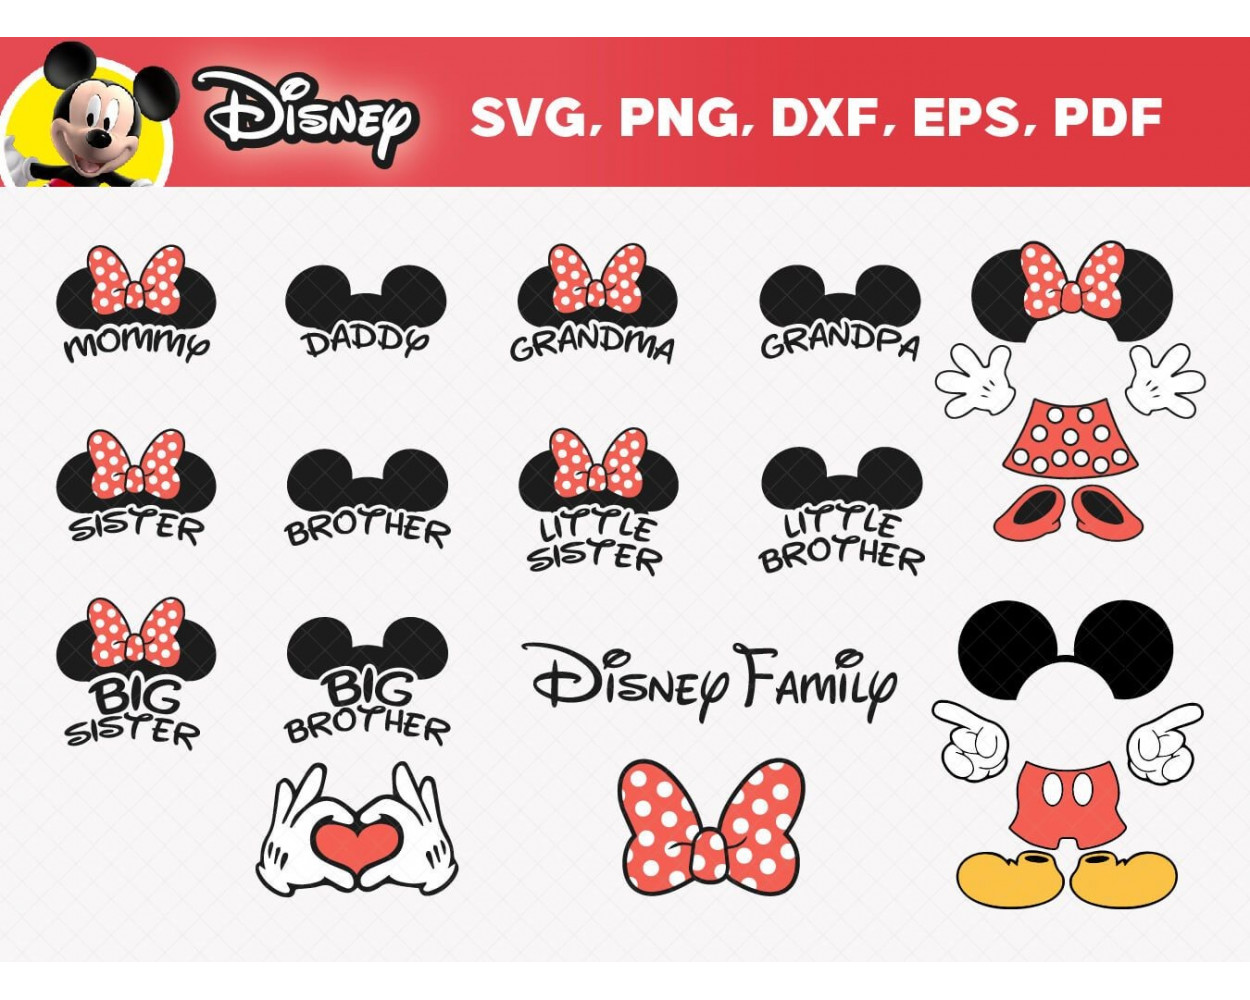 Disney SVG Bundle, High-Quality SVG Files for Crafting, Party